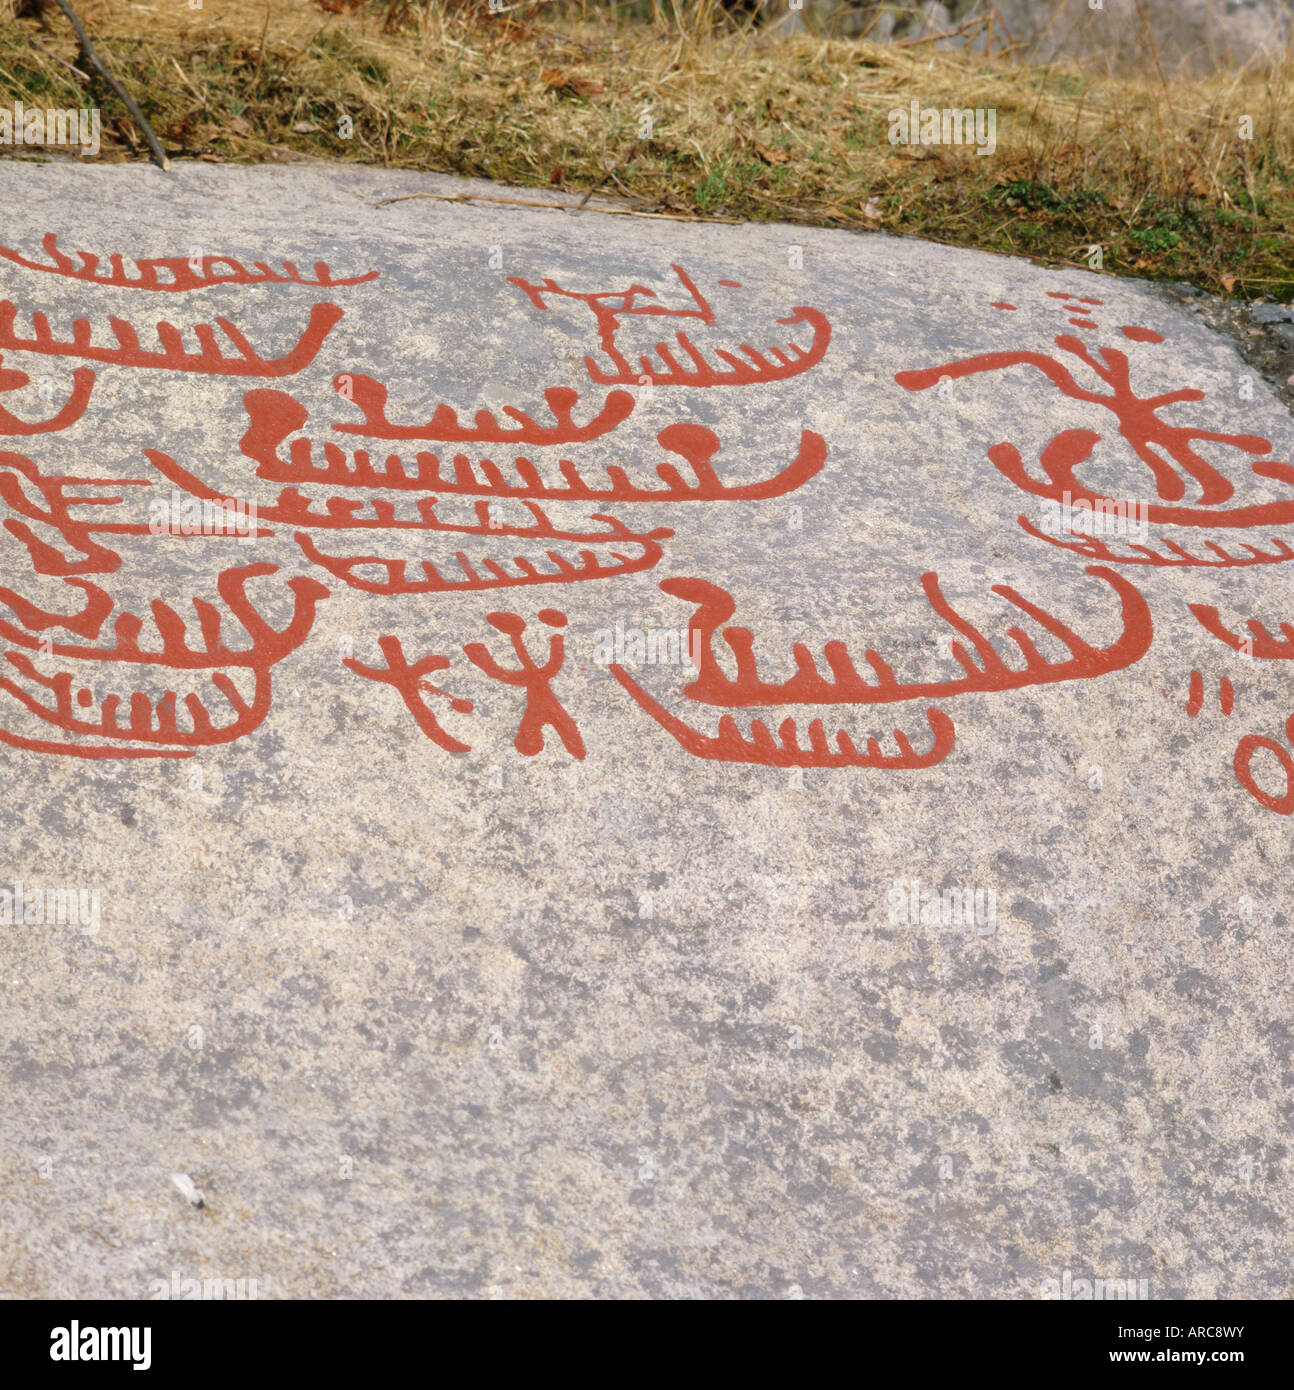 Ancient rock carvings from pre-Viking times, Ostfold near Halden, Norway, Scandinavia, Europe Stock Photo